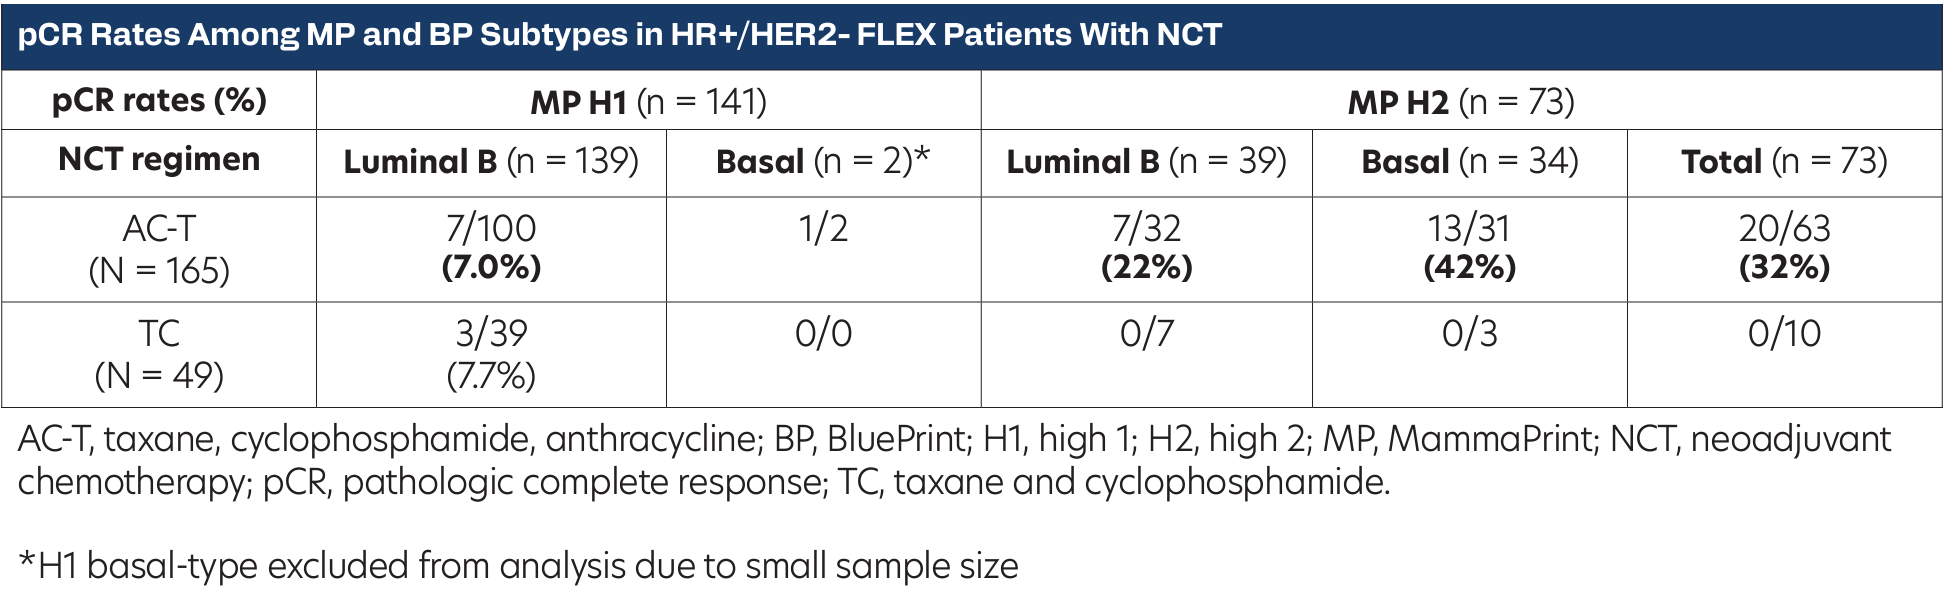 pCR Rates Among MP and BP Subtypes in HR+/HER2- FLEX Patients With NCT